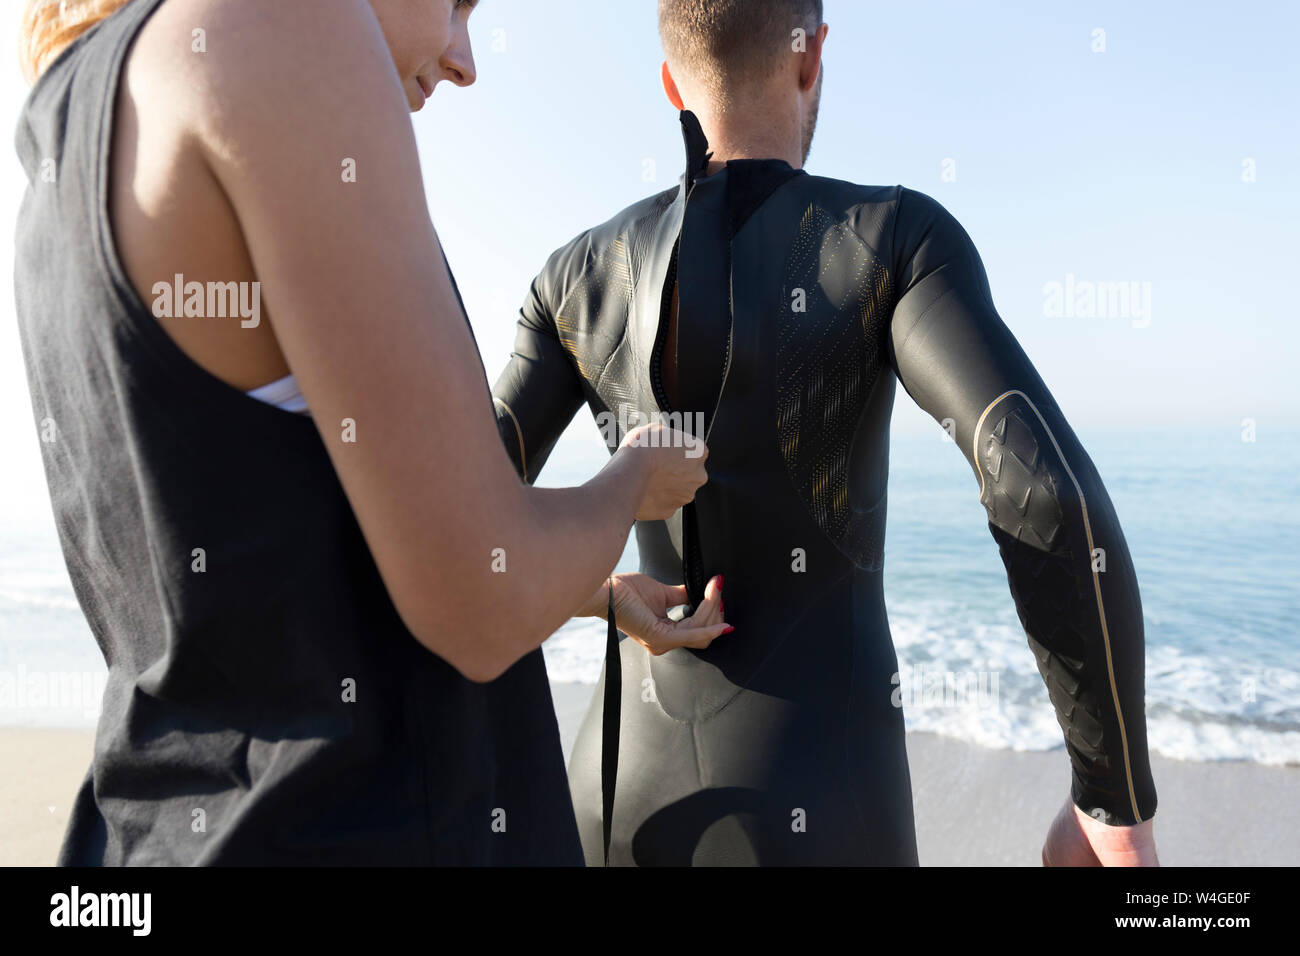 Woman zipping up man's wetsuit at the beach Stock Photo